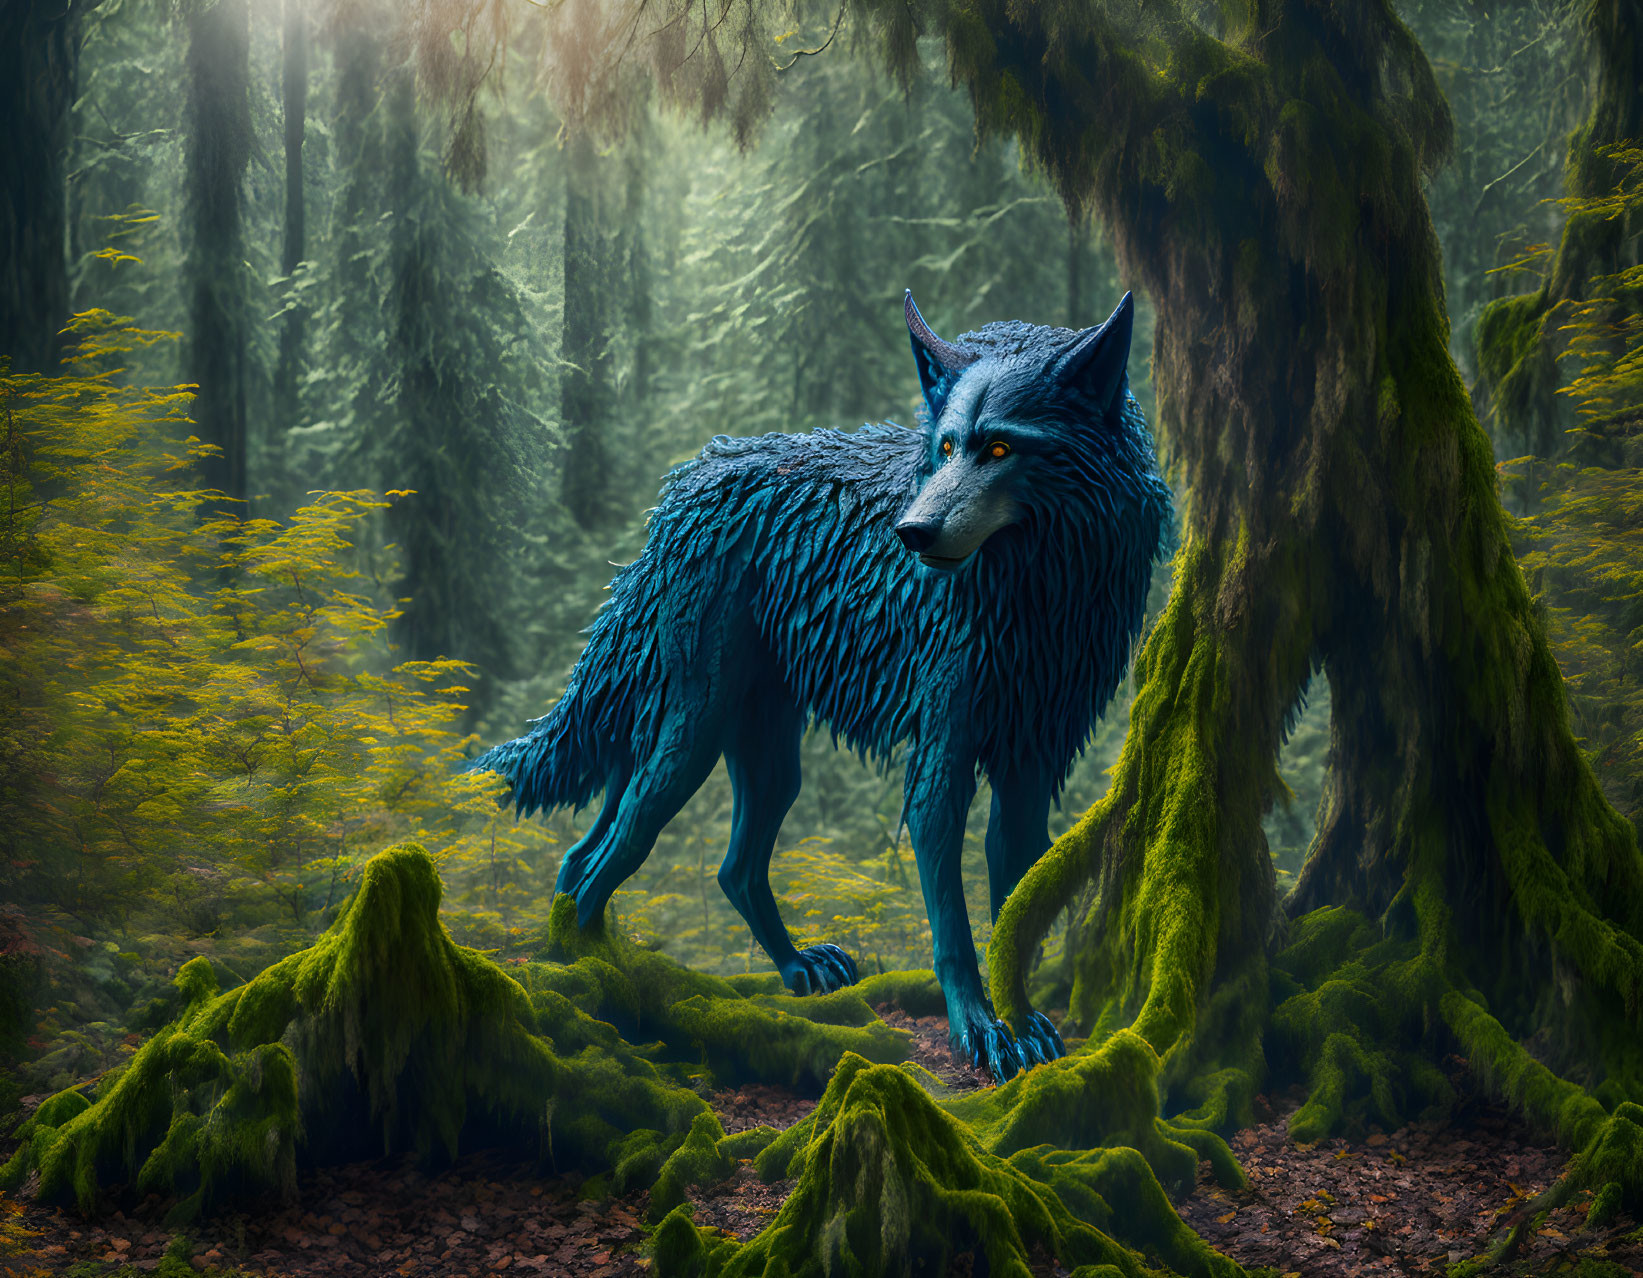 Blue wolf in lush green forest with moss-covered trees